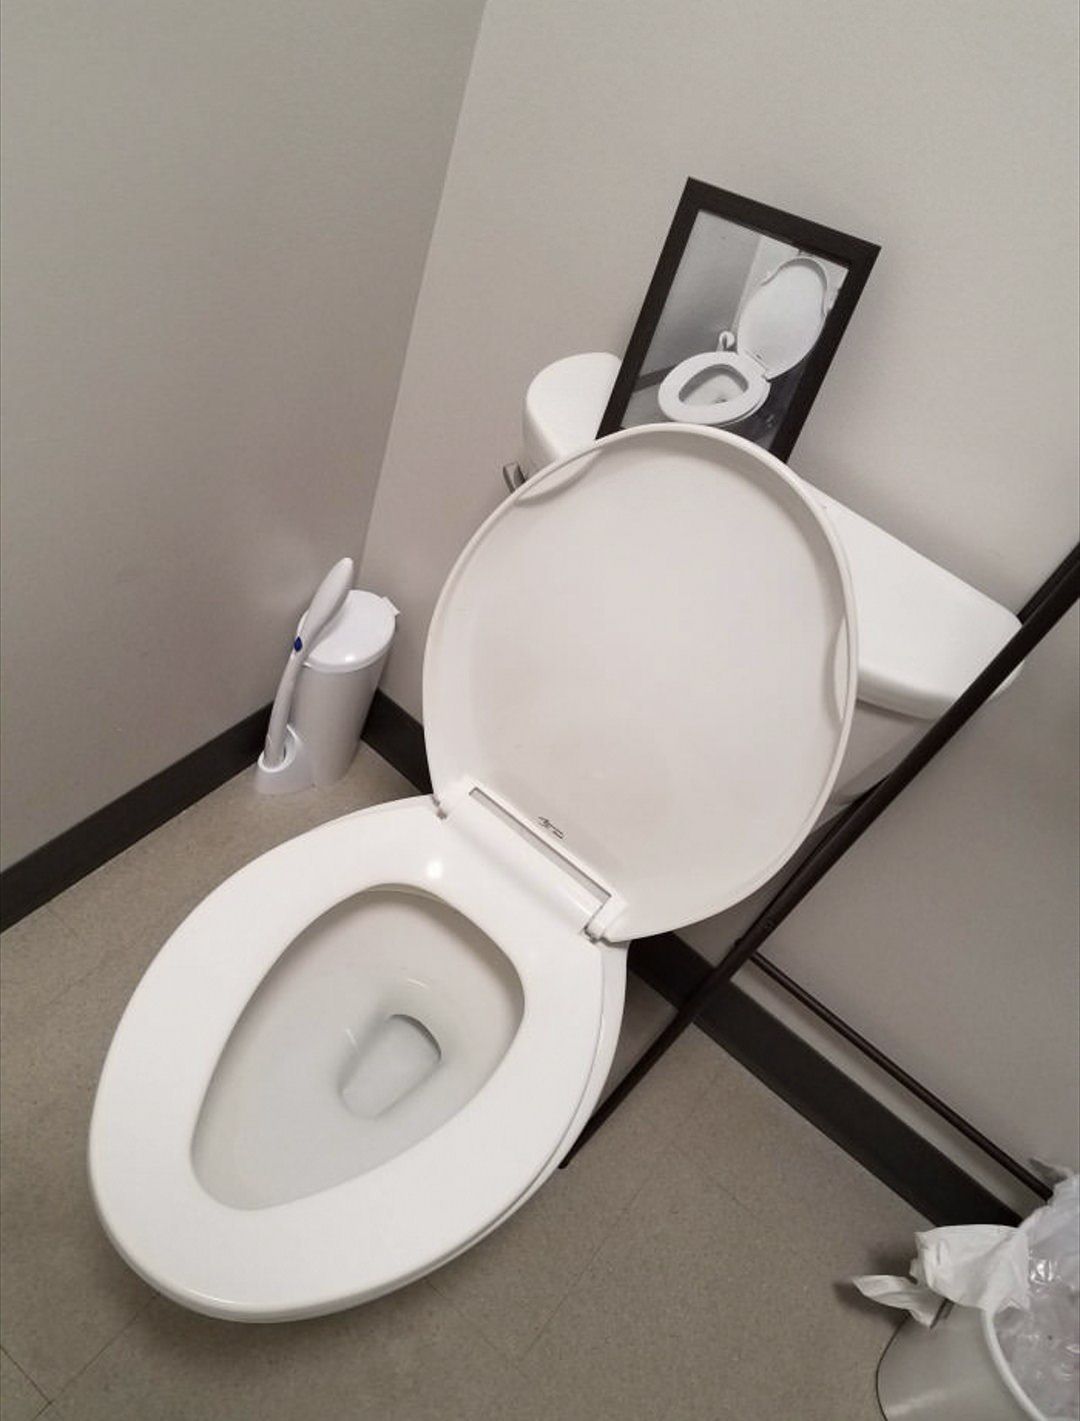 My friend has a framed photo of his toilet on his toilet